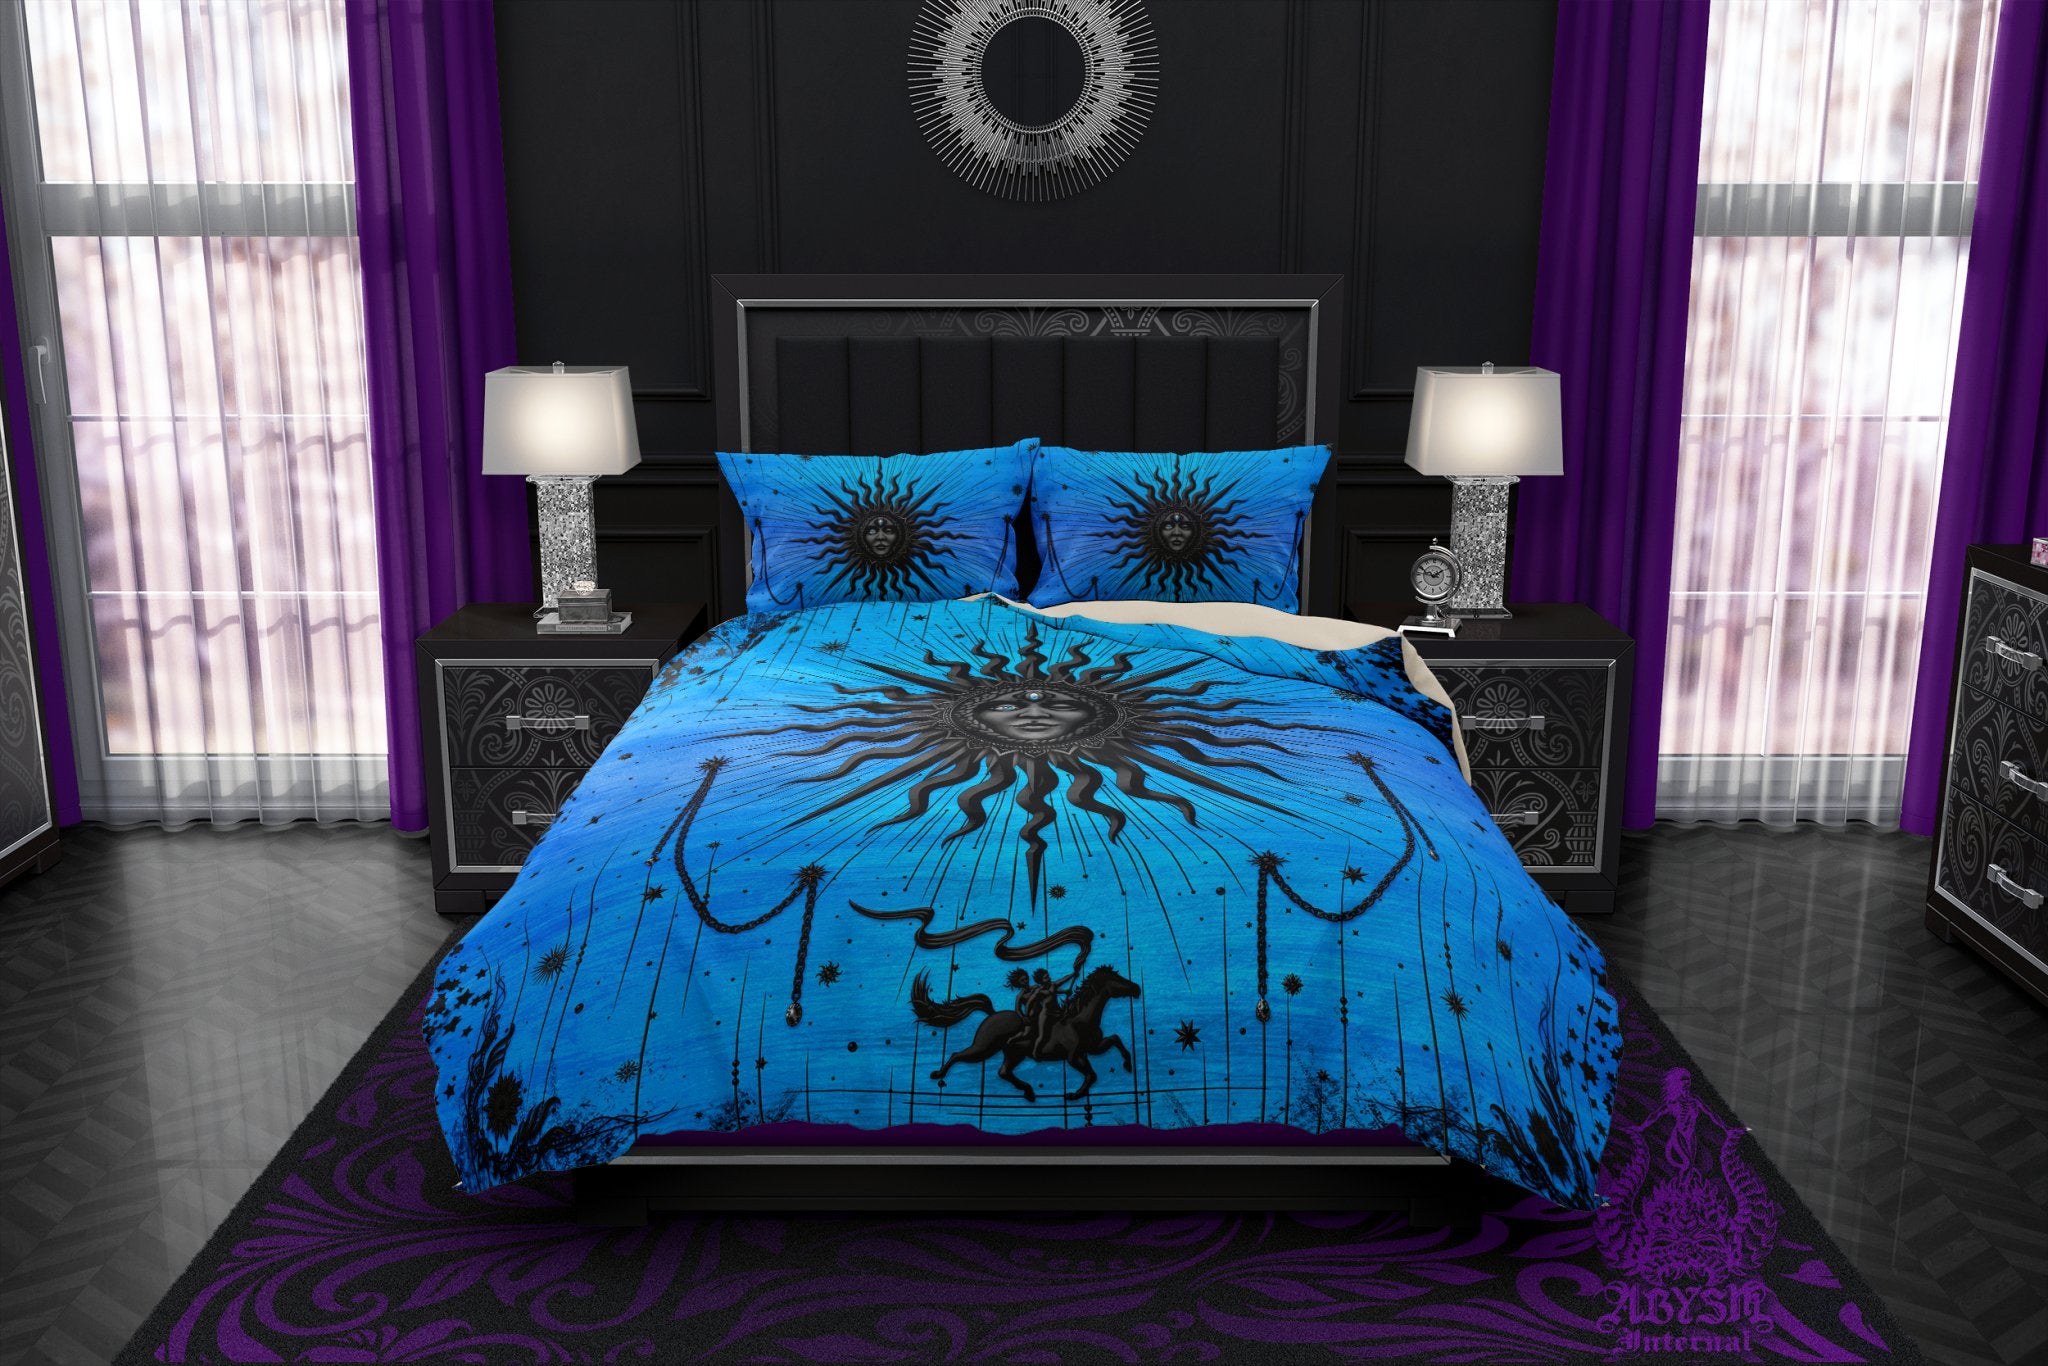 Black Sun Duvet Cover, Bed Covering, Witchy Comforter, Esoteric Bedroom Decor King, Queen & Twin Bedding Set - Tarot Arcana Art, Cyan - Abysm Internal